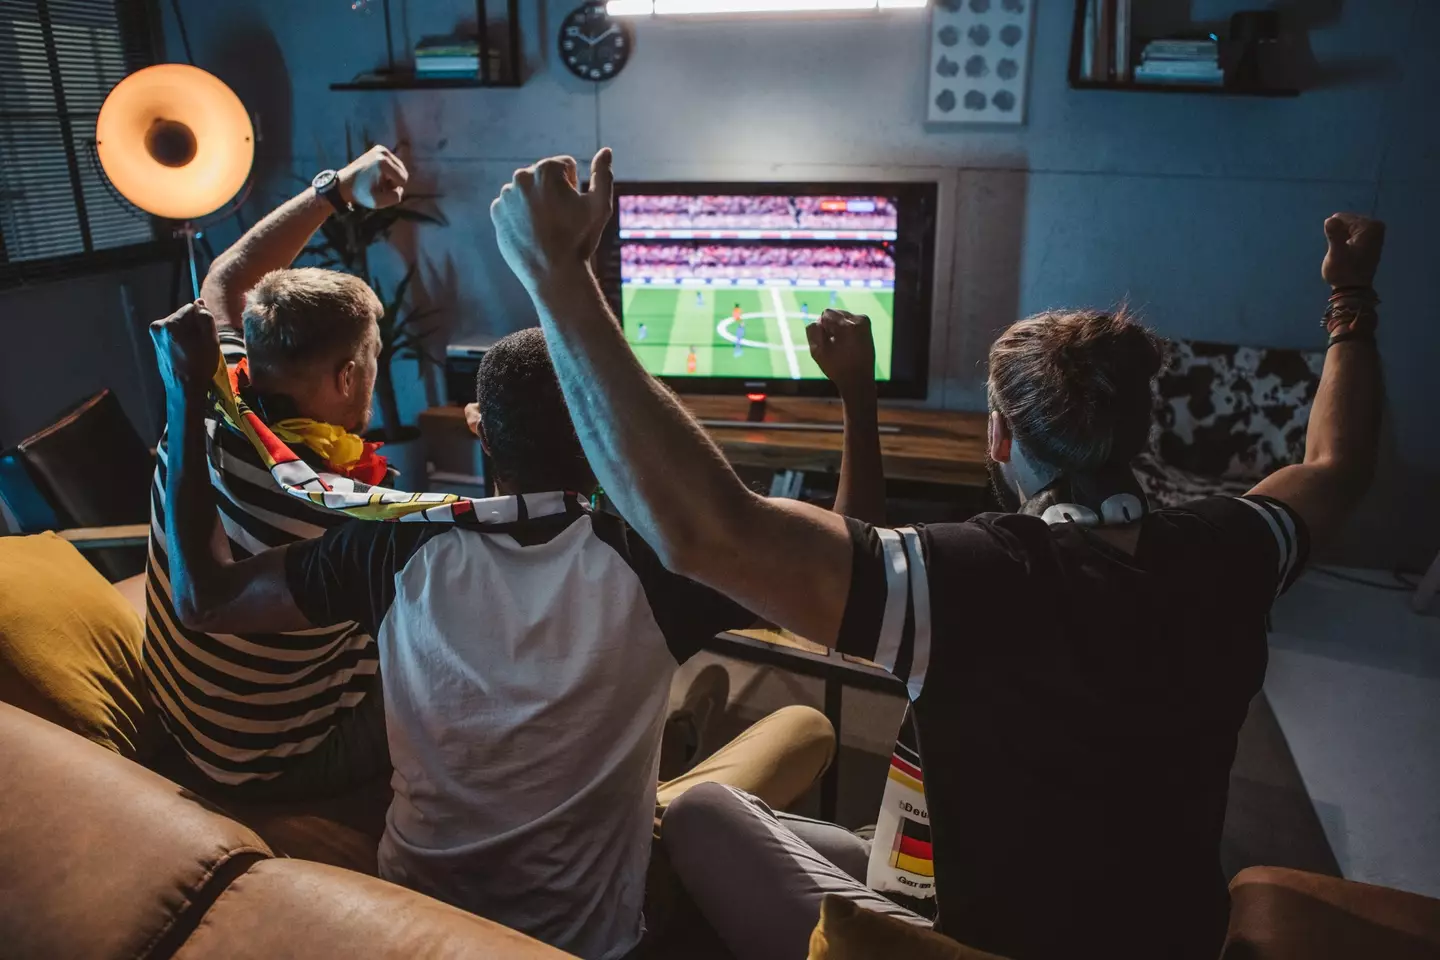 Fans could receive a visit if they're caught illegally streaming football.